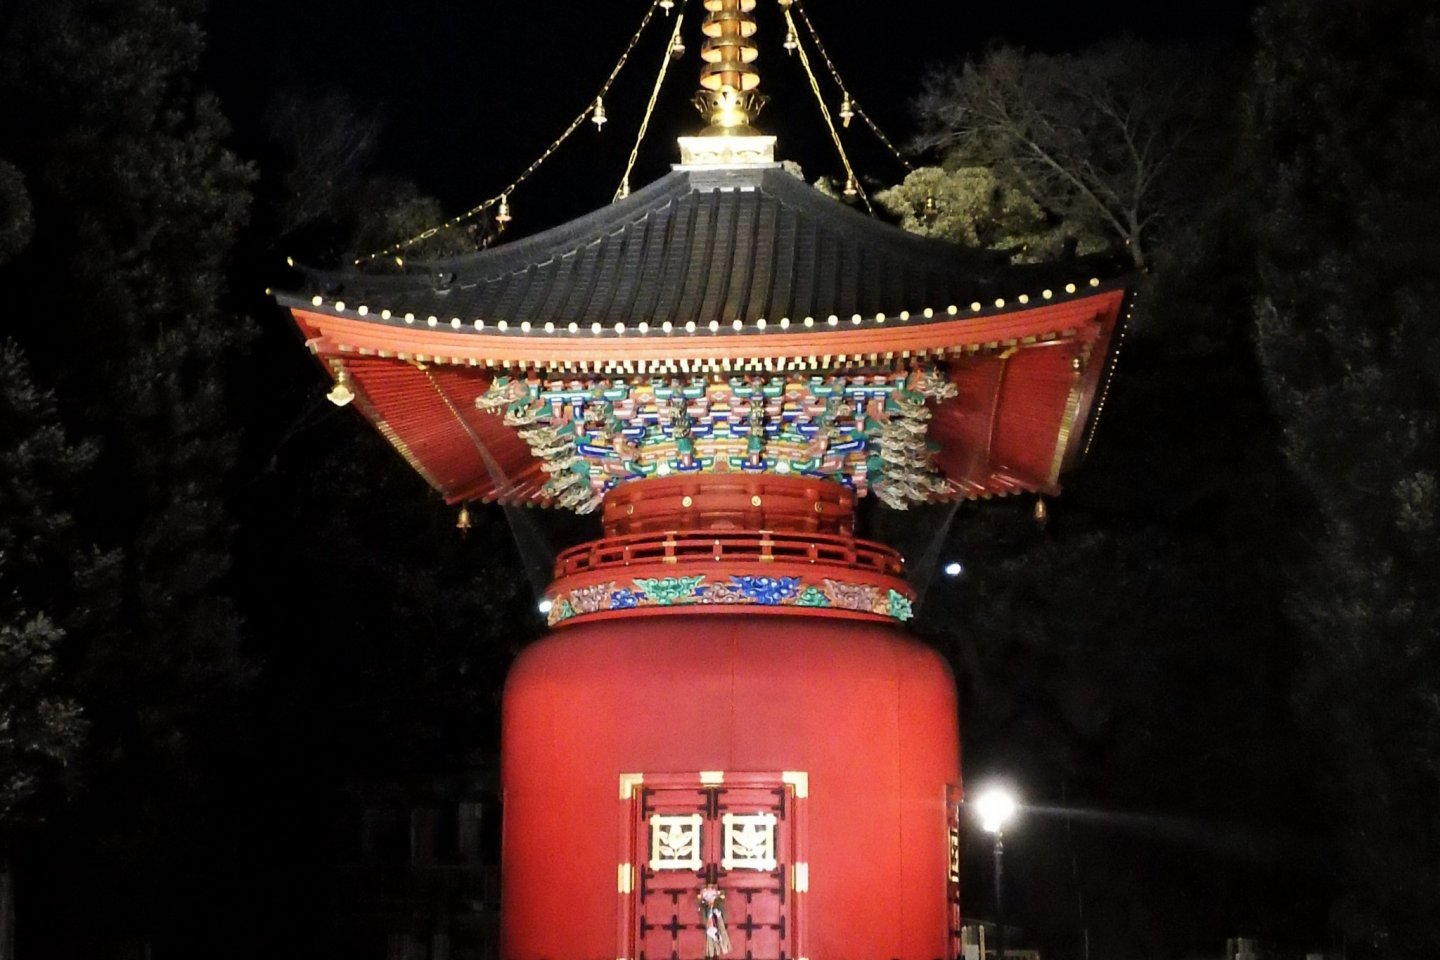 One of the impressive structures within the grounds of Ikegami Honmonji